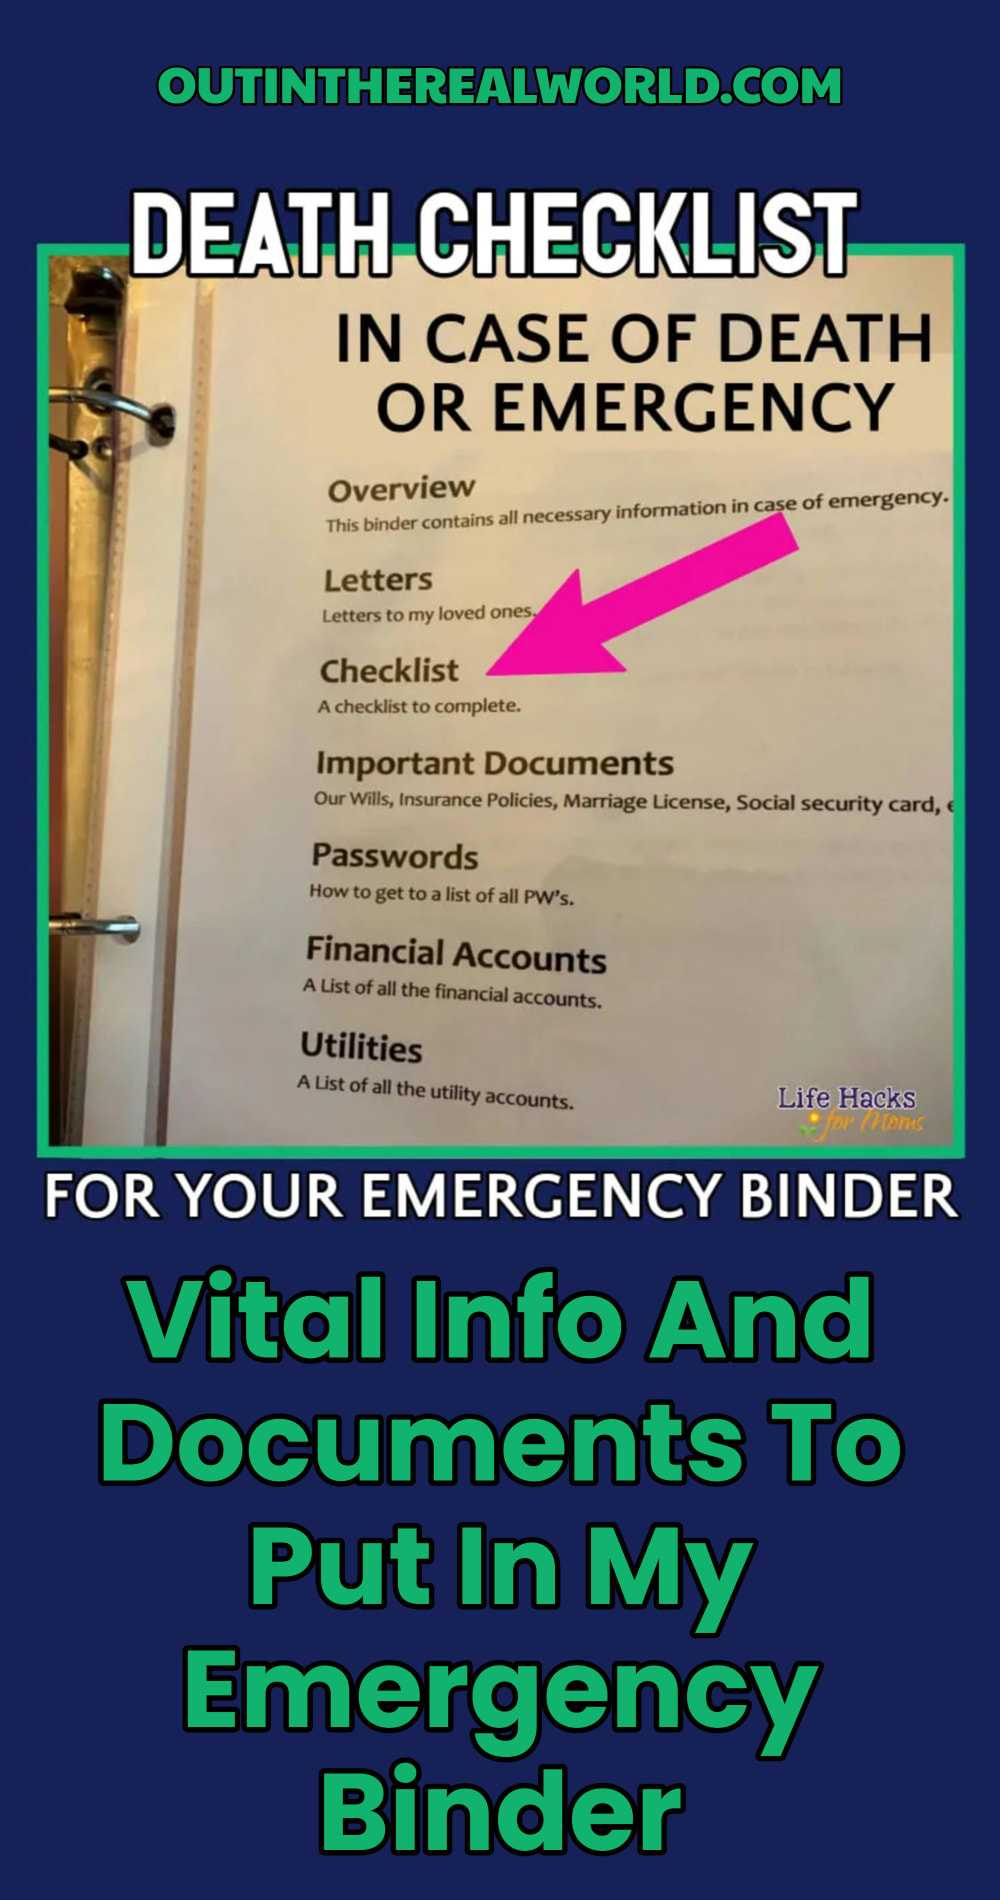 Emergency Binder Checklist - Vital info and important documents to include in my Emergency Binder